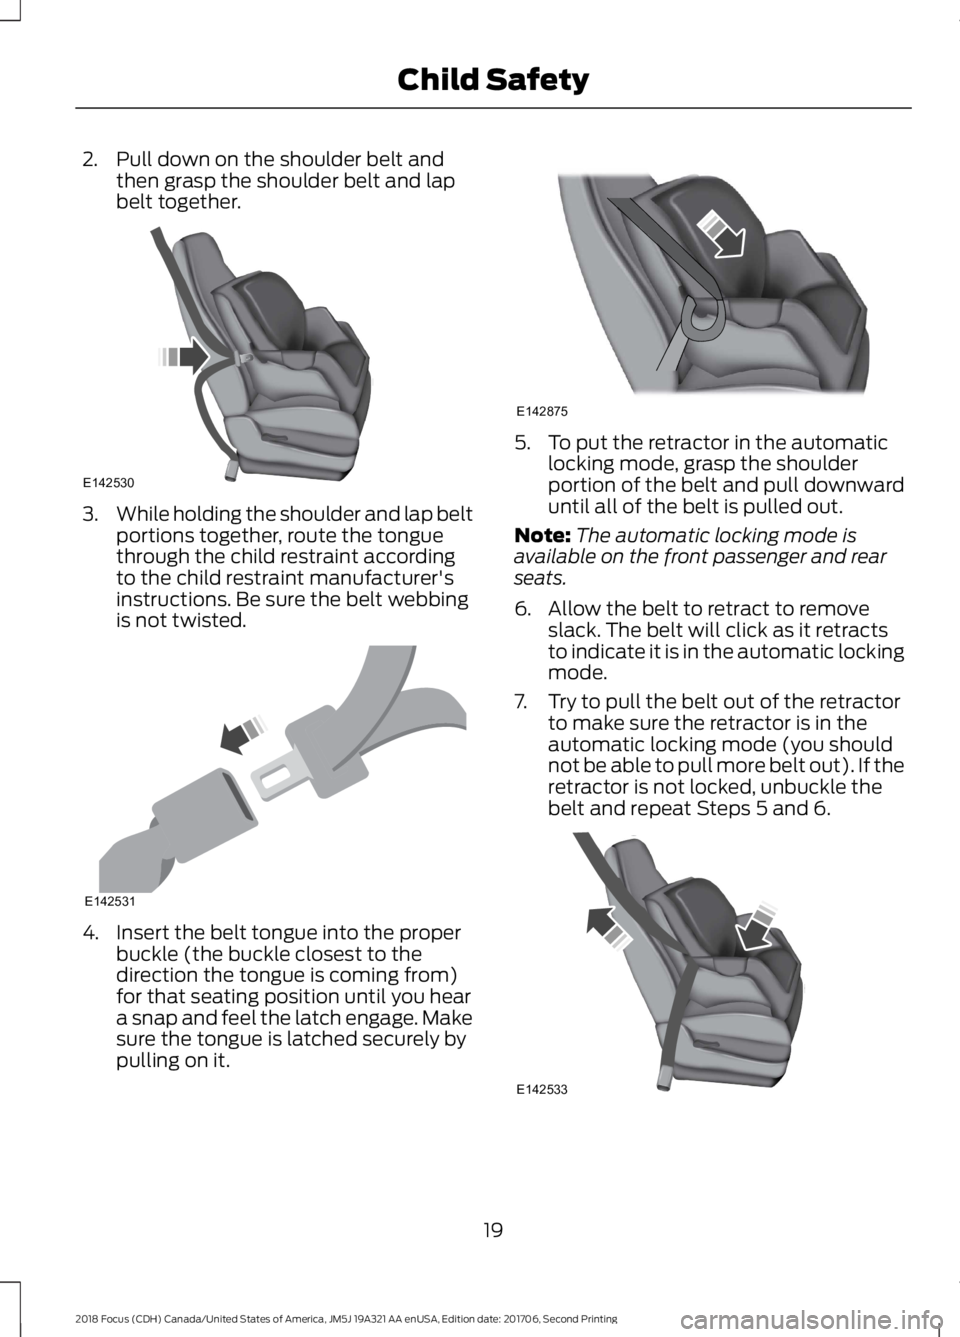 FORD FOCUS 2018  Owners Manual 2.Pull down on the shoulder belt andthen grasp the shoulder belt and lapbelt together.
3.While holding the shoulder and lap beltportions together, route the tonguethrough the child restraint according